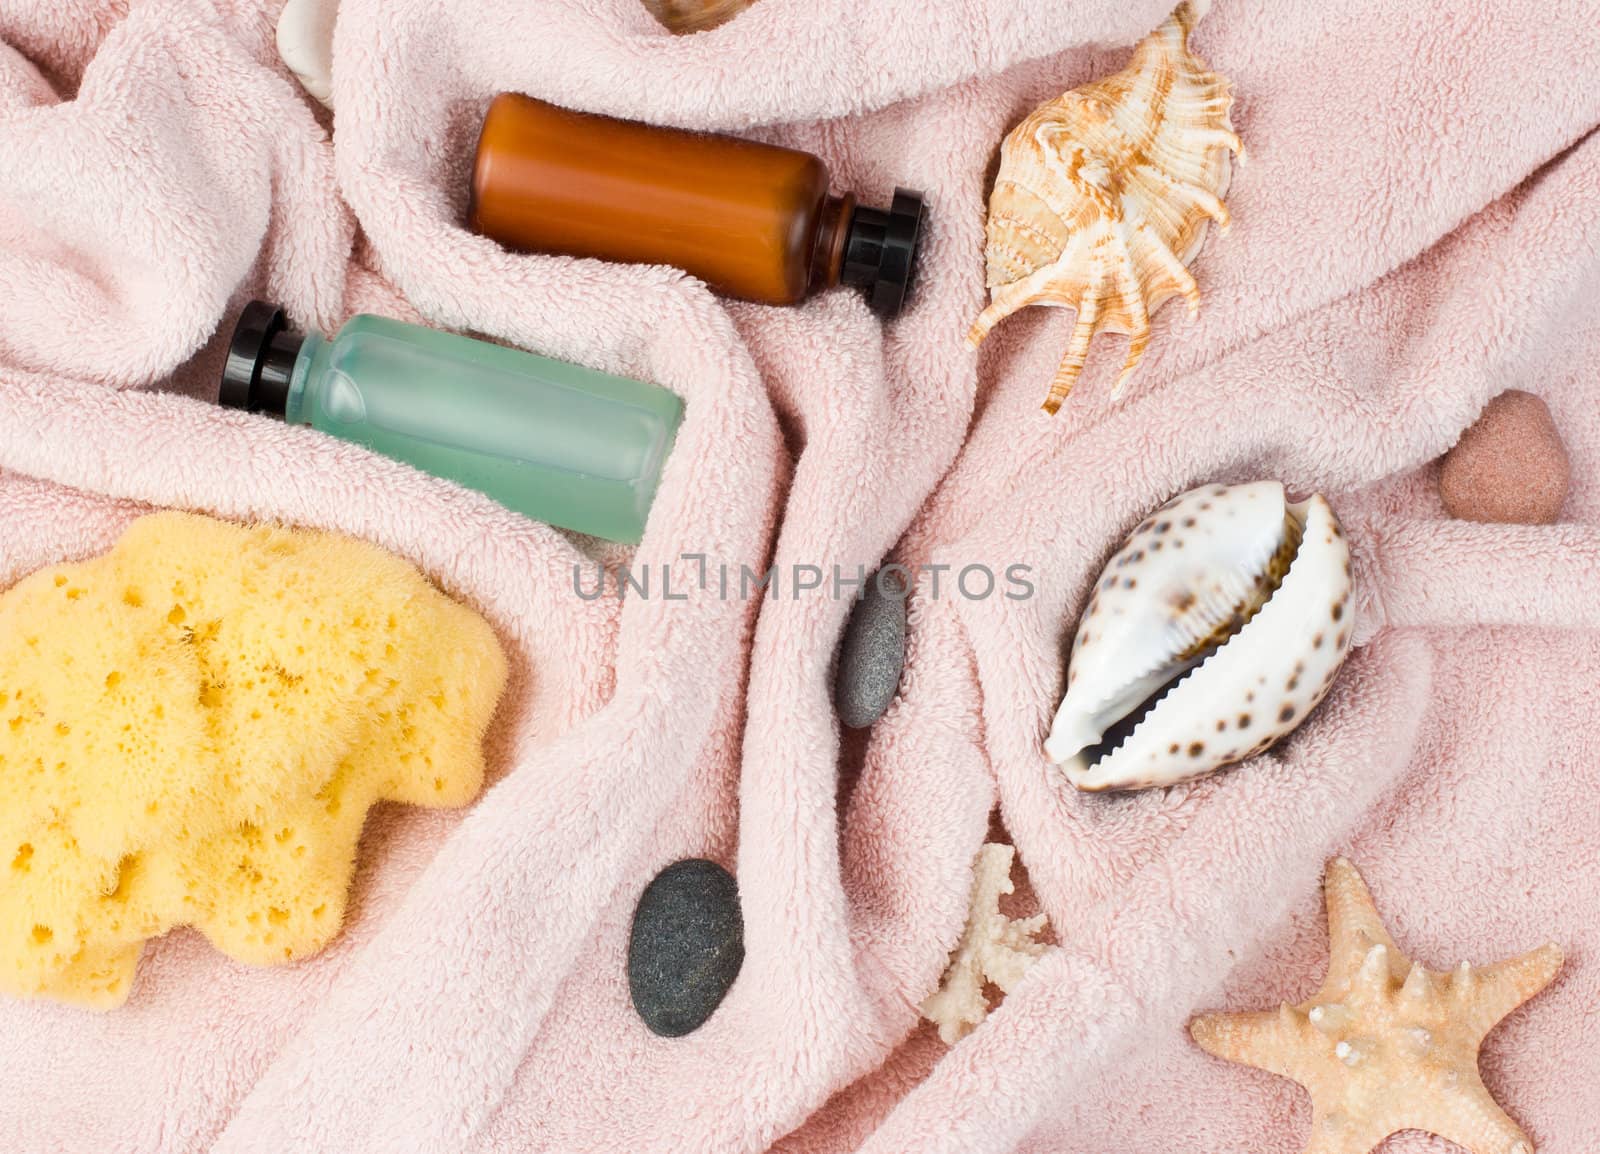 Collection of various spa or bath accessories on pink towel